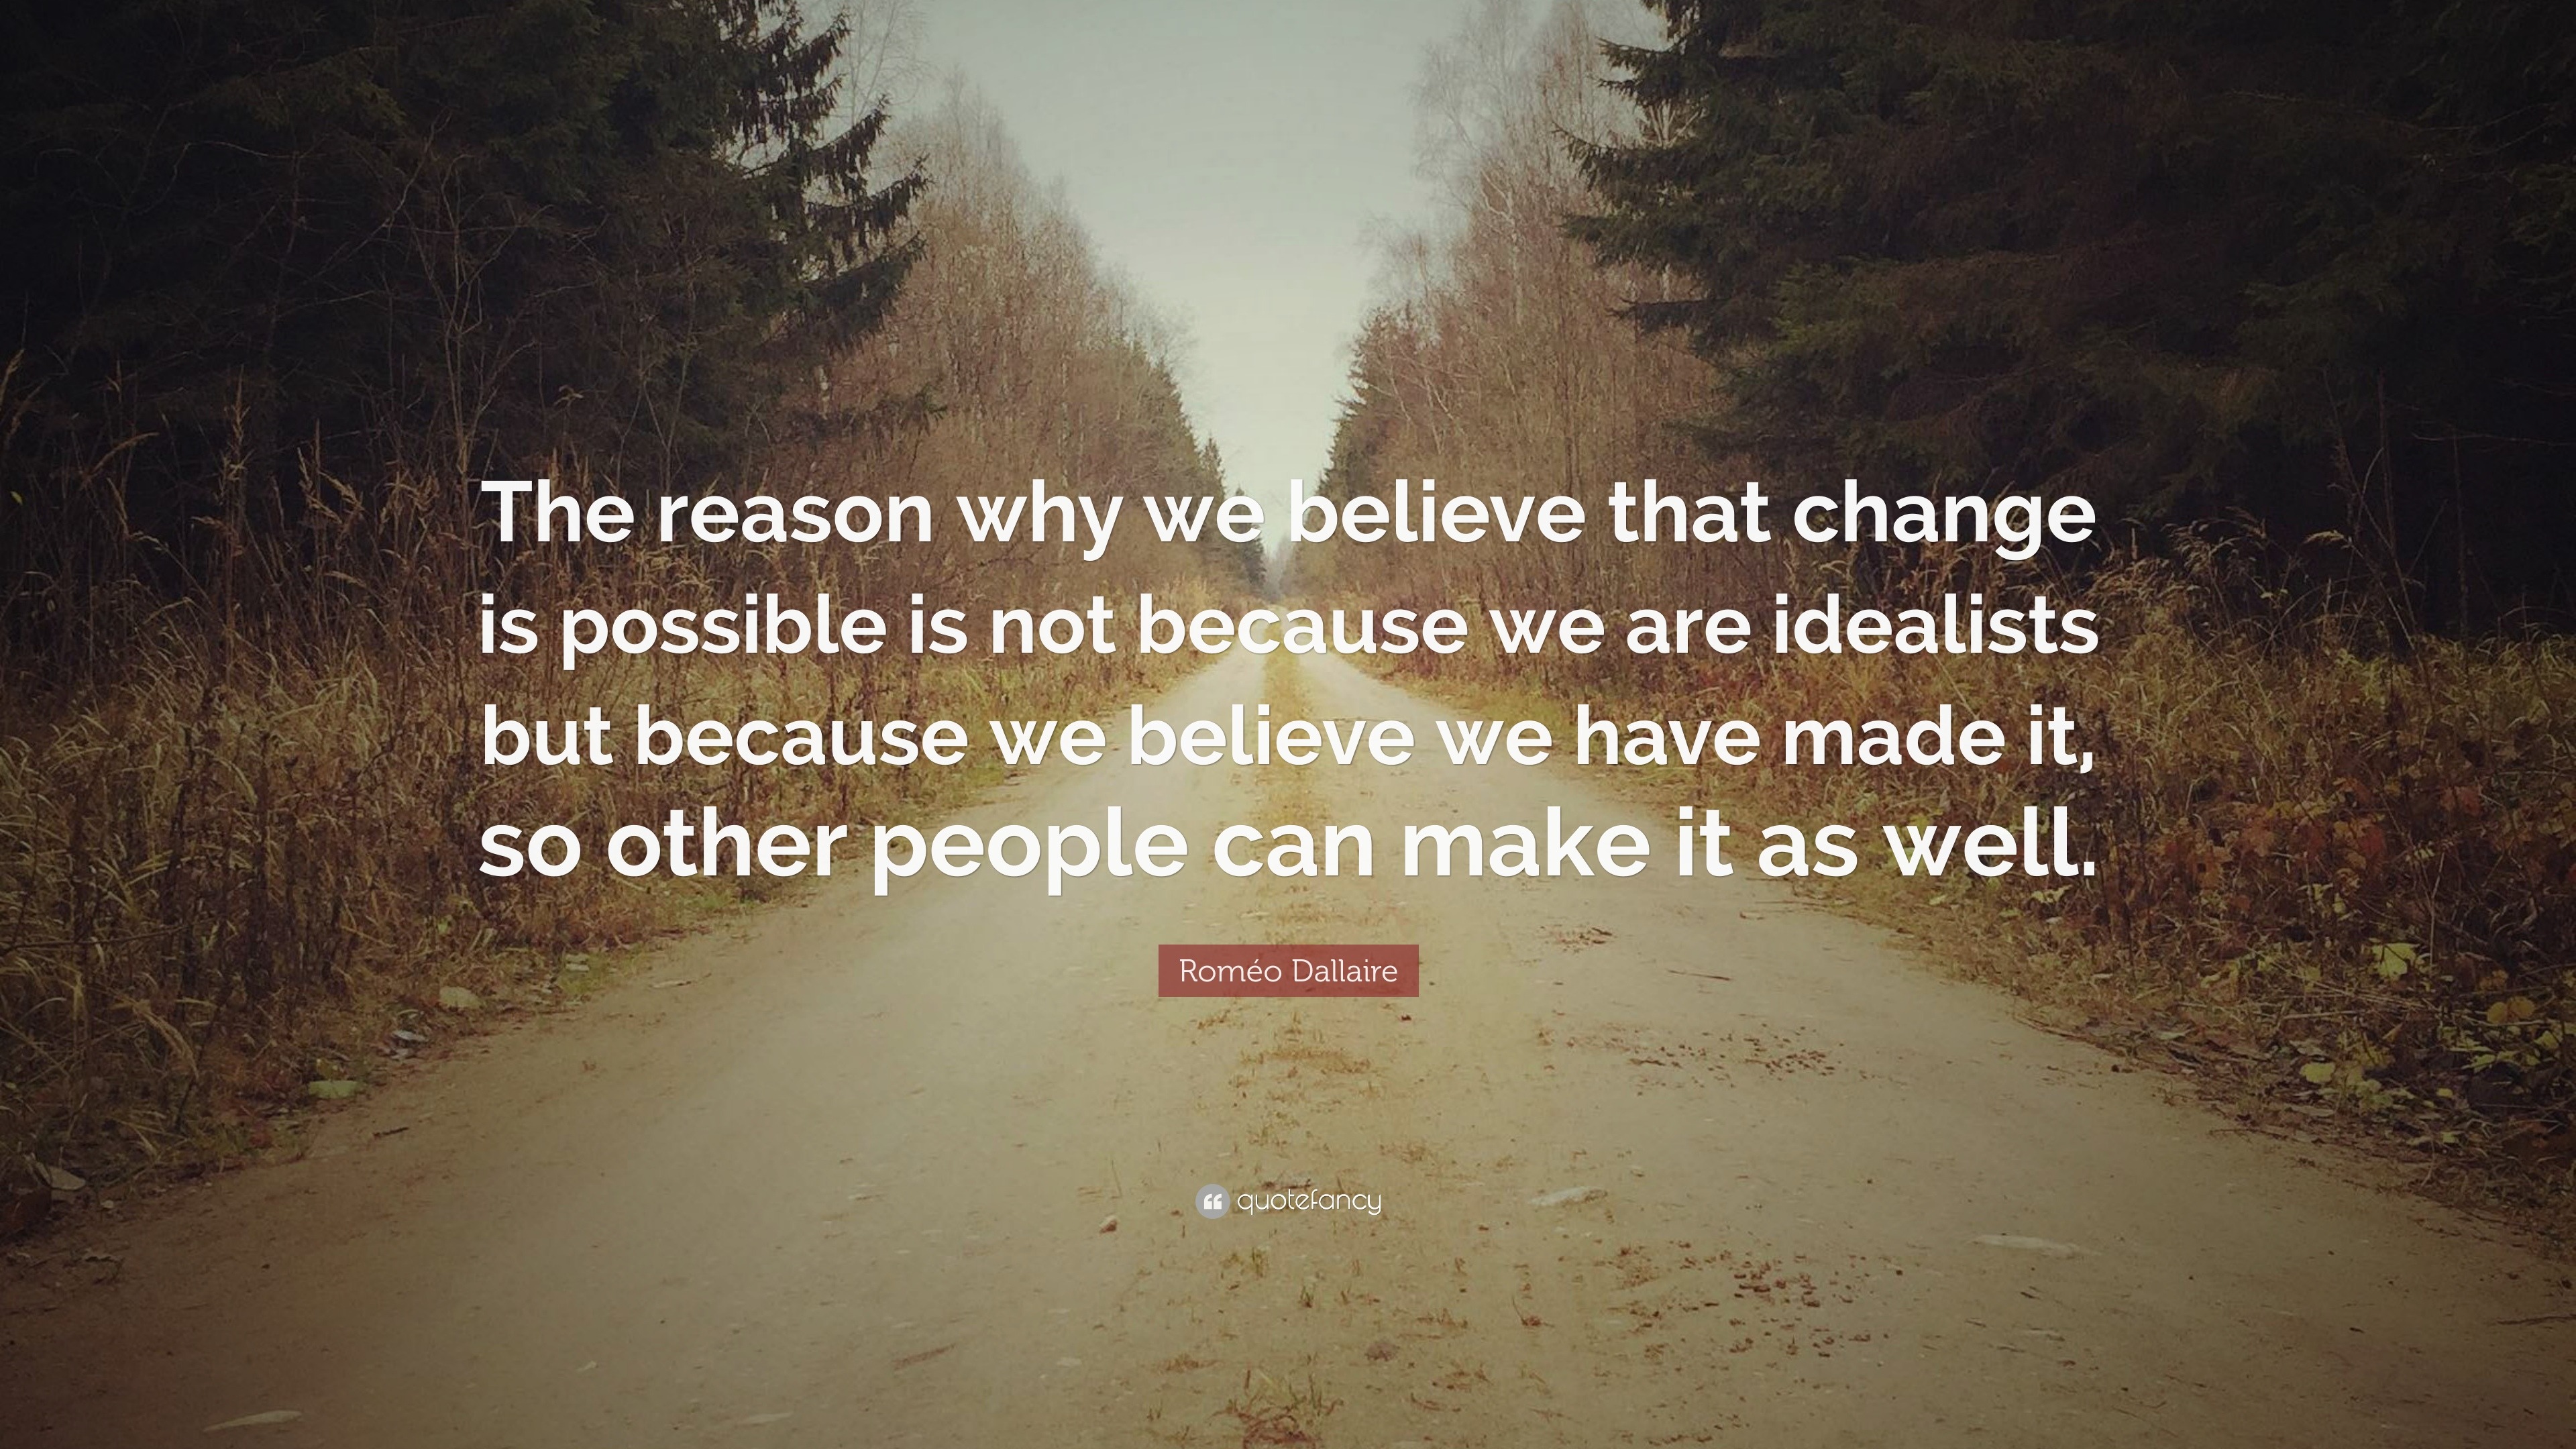 Roméo Dallaire Quote: “The reason why we believe that change is ...